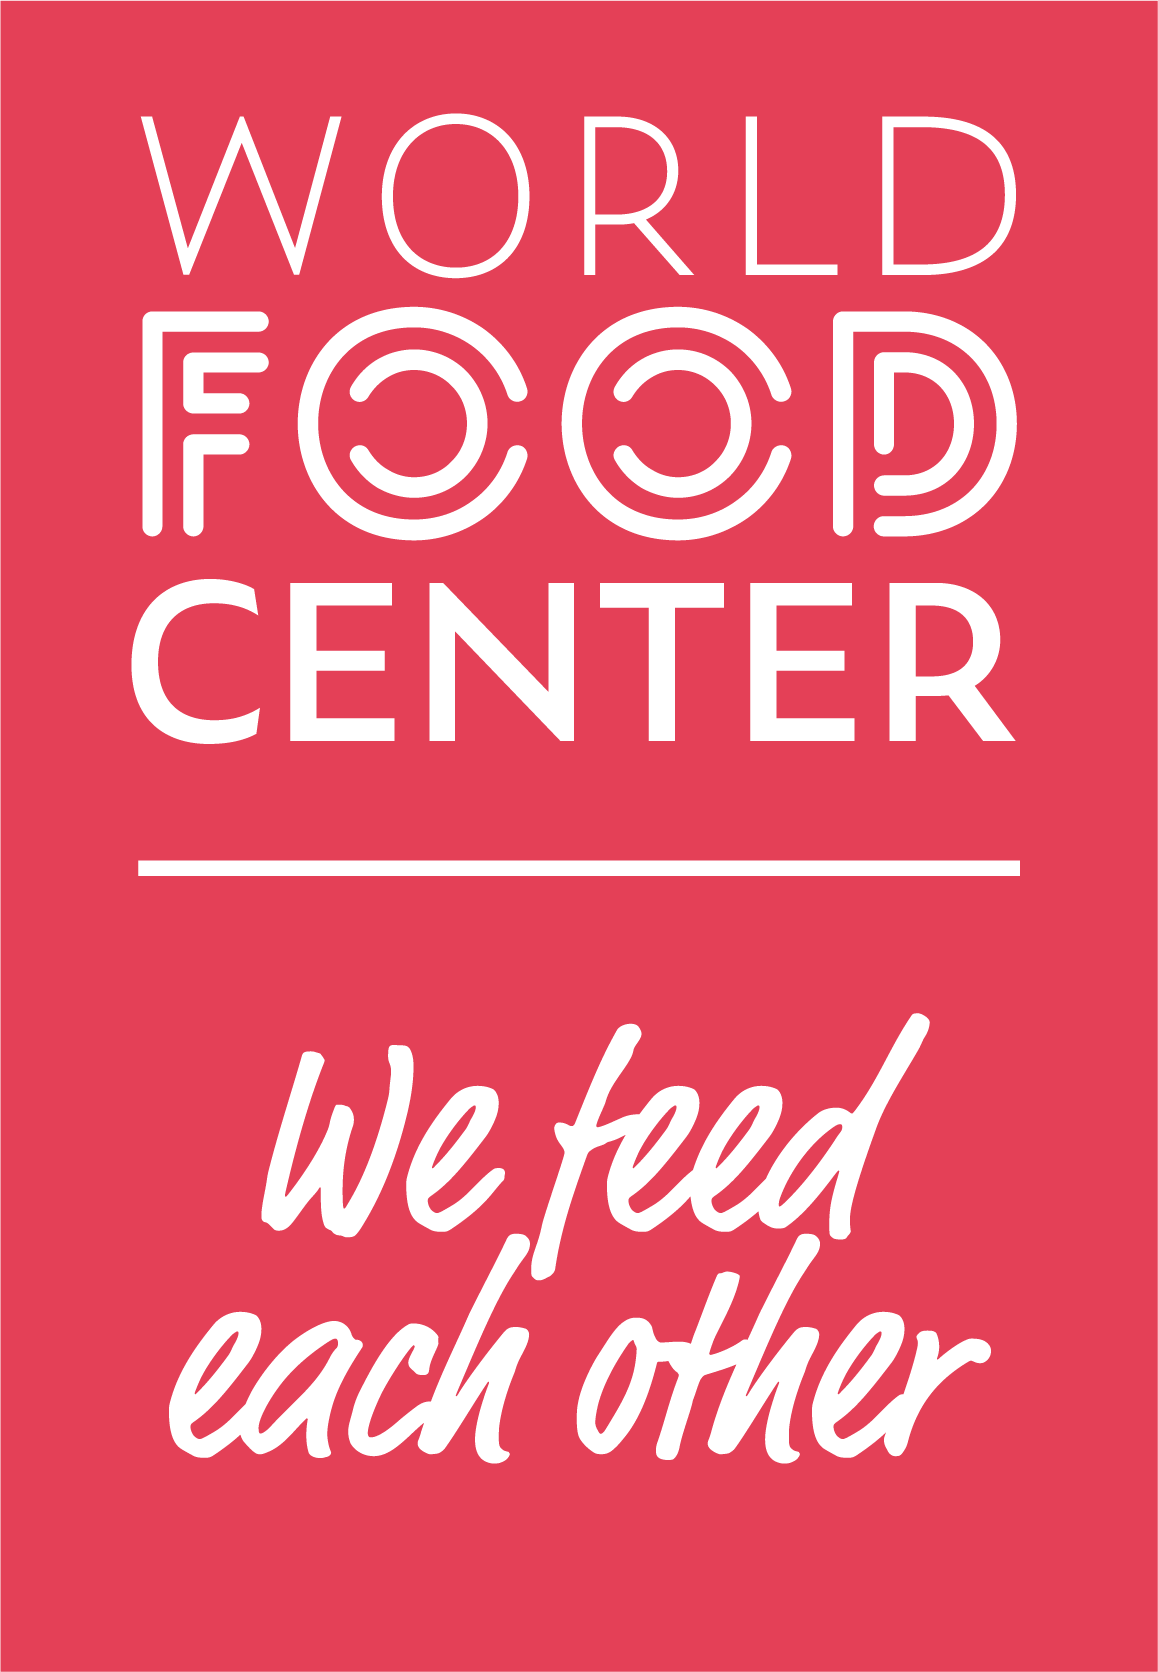 LOGO - World Food Center - We feed each other